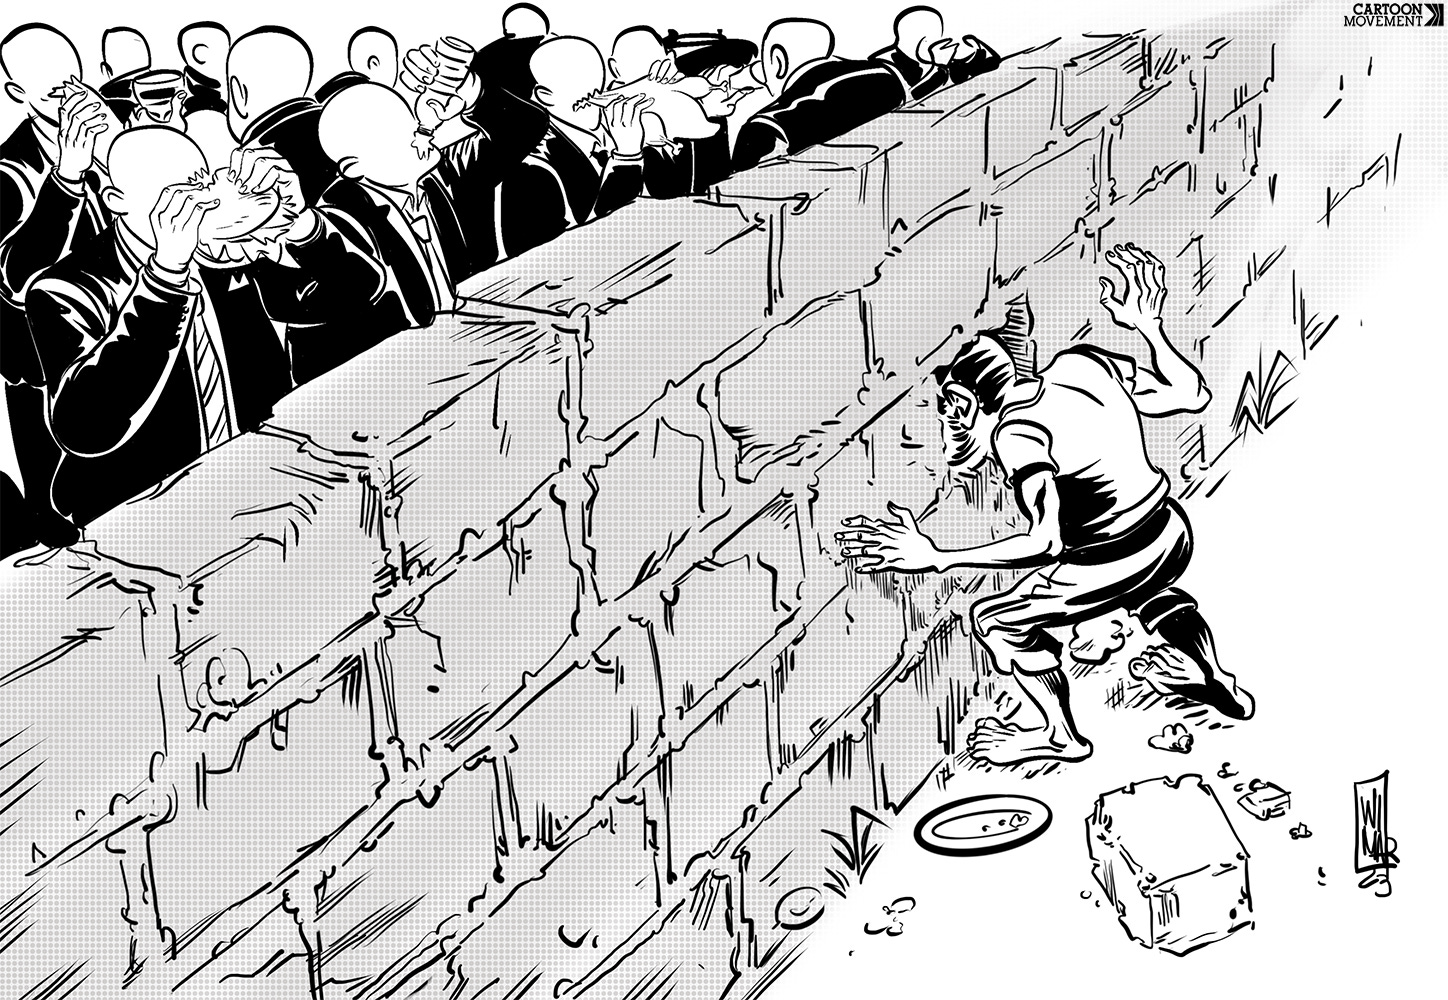 Cartoon showing s group of men in suits are seen eating and drinking while at the other end of a stone wall a poorly dressed man sticks his head into the wall watching the scene of those who are eating. 